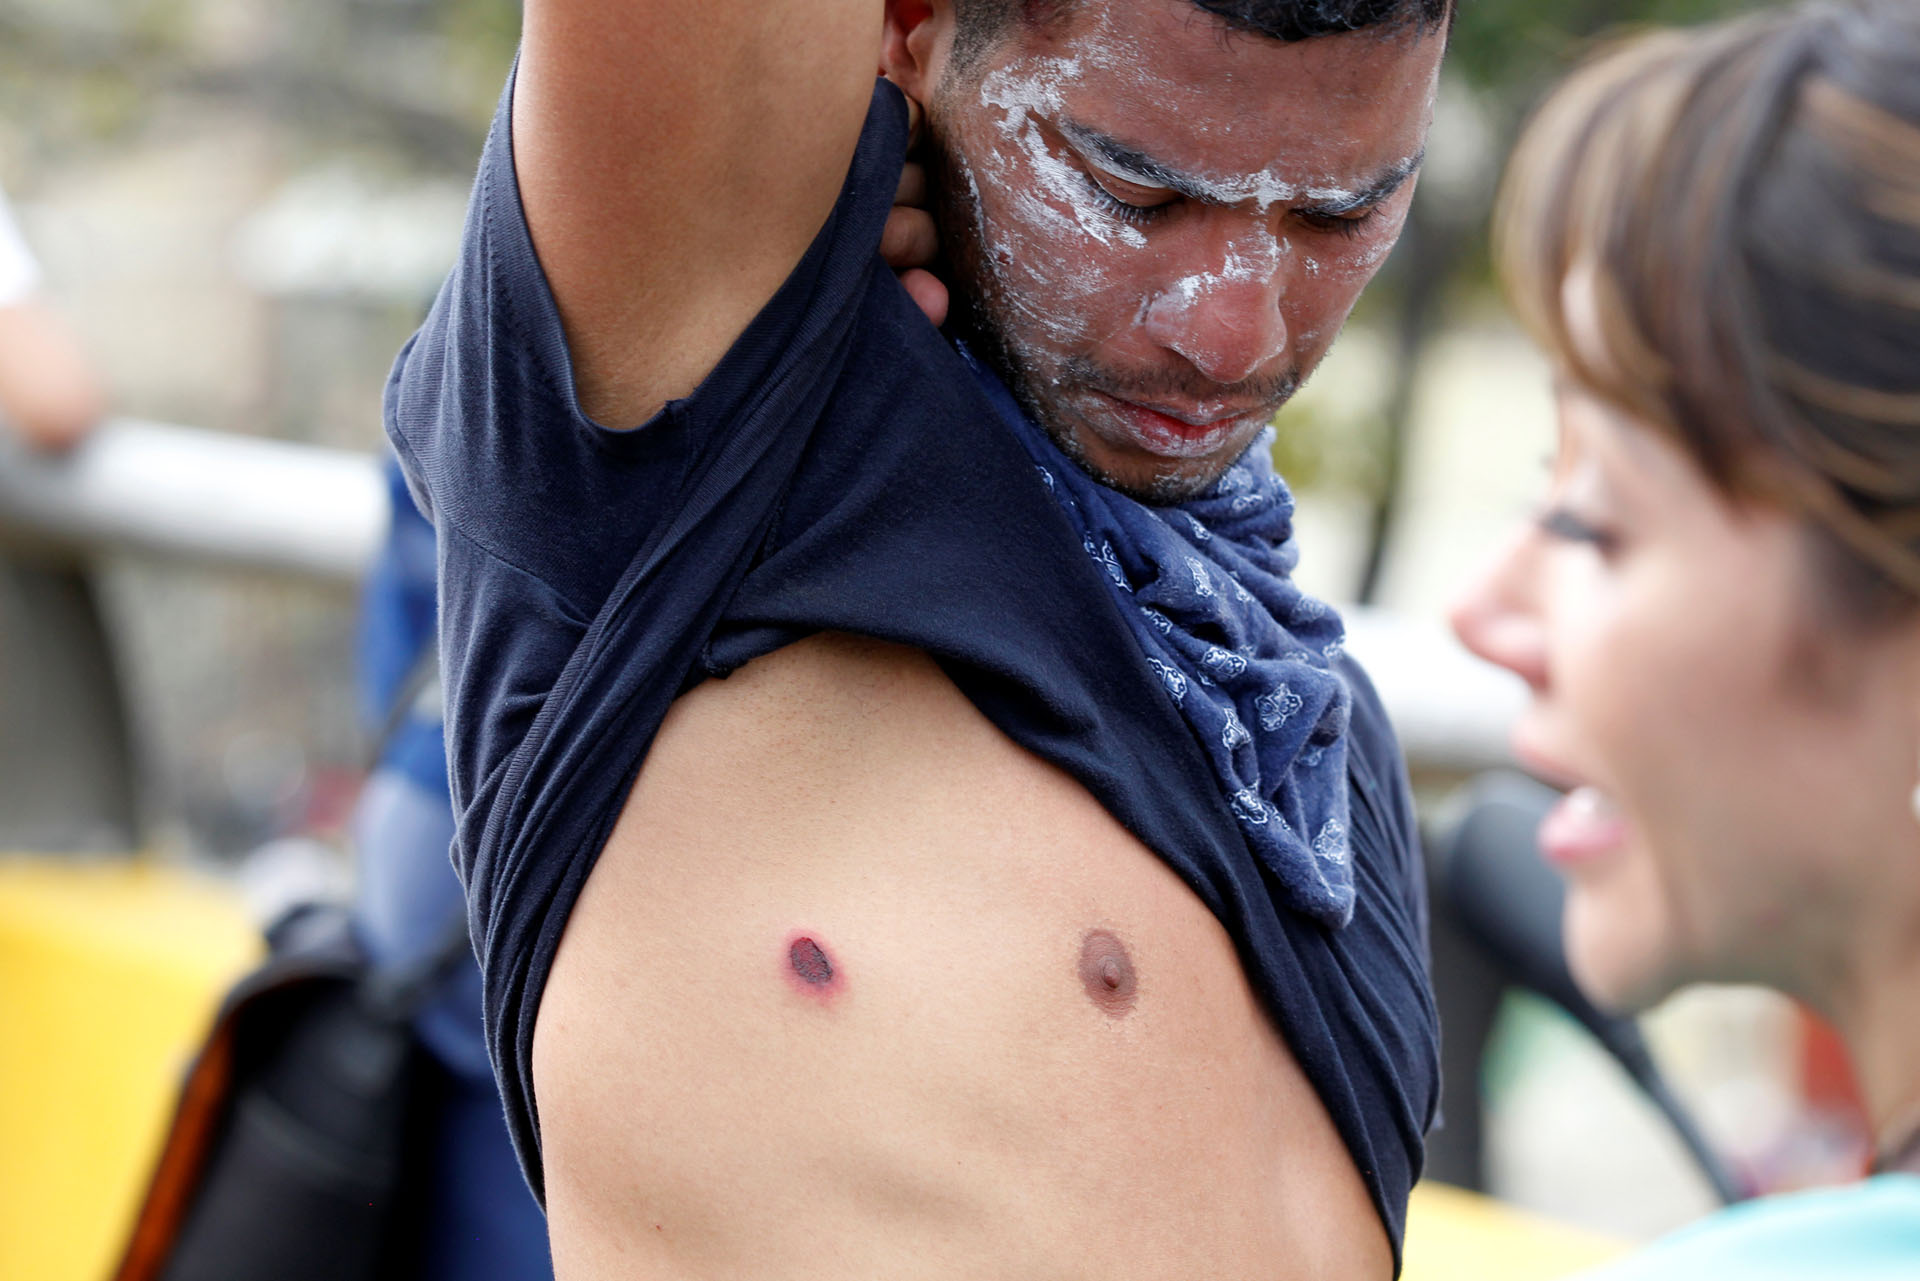 A demonstrator shows an injury caused by rubber bullets fired by the police during an opposition rally in Caracas, Venezuela, April 6, 2017. REUTERS/Christian Veron